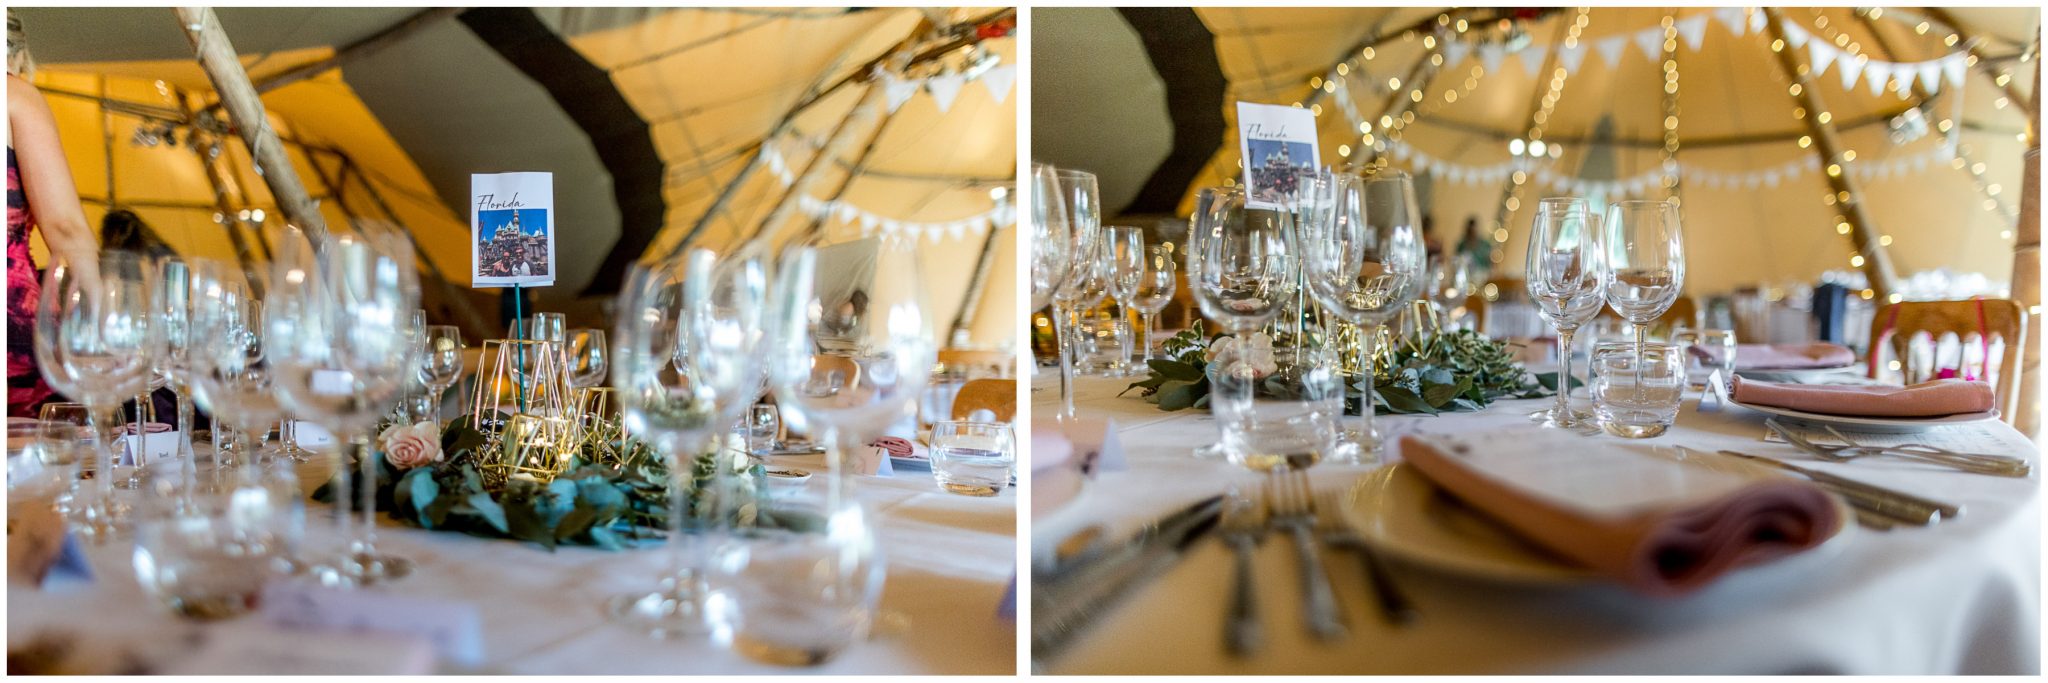 Table set-up inside the wedding reception tipi marquee